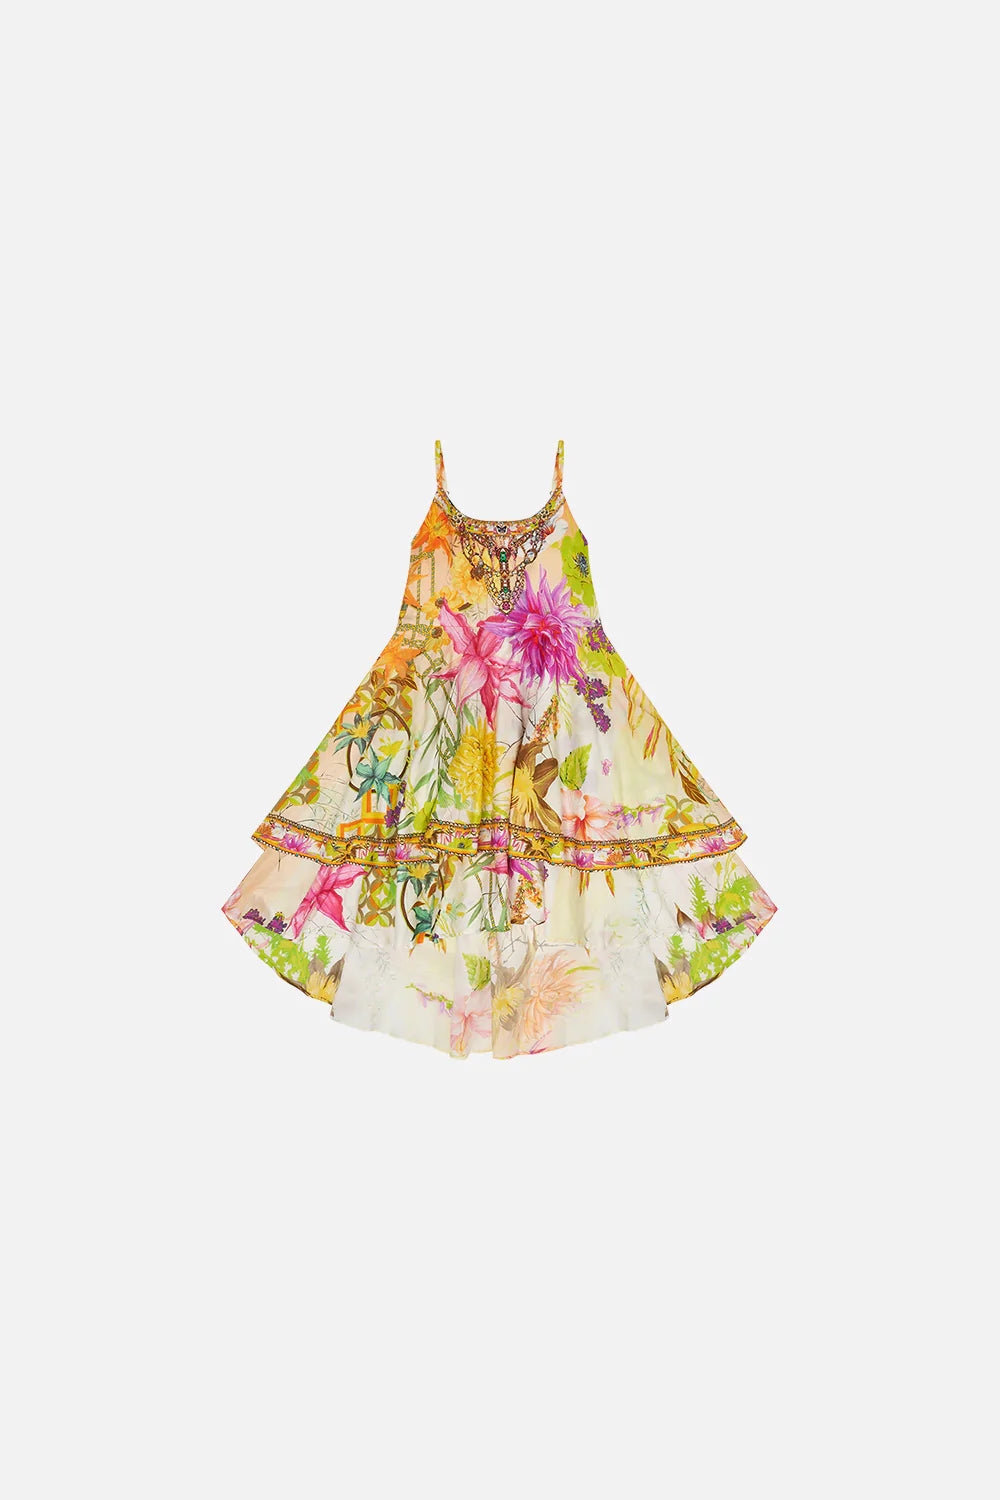 Shop Kids Clothing and Swimwear ON SALE and Online | Free Shipping ...